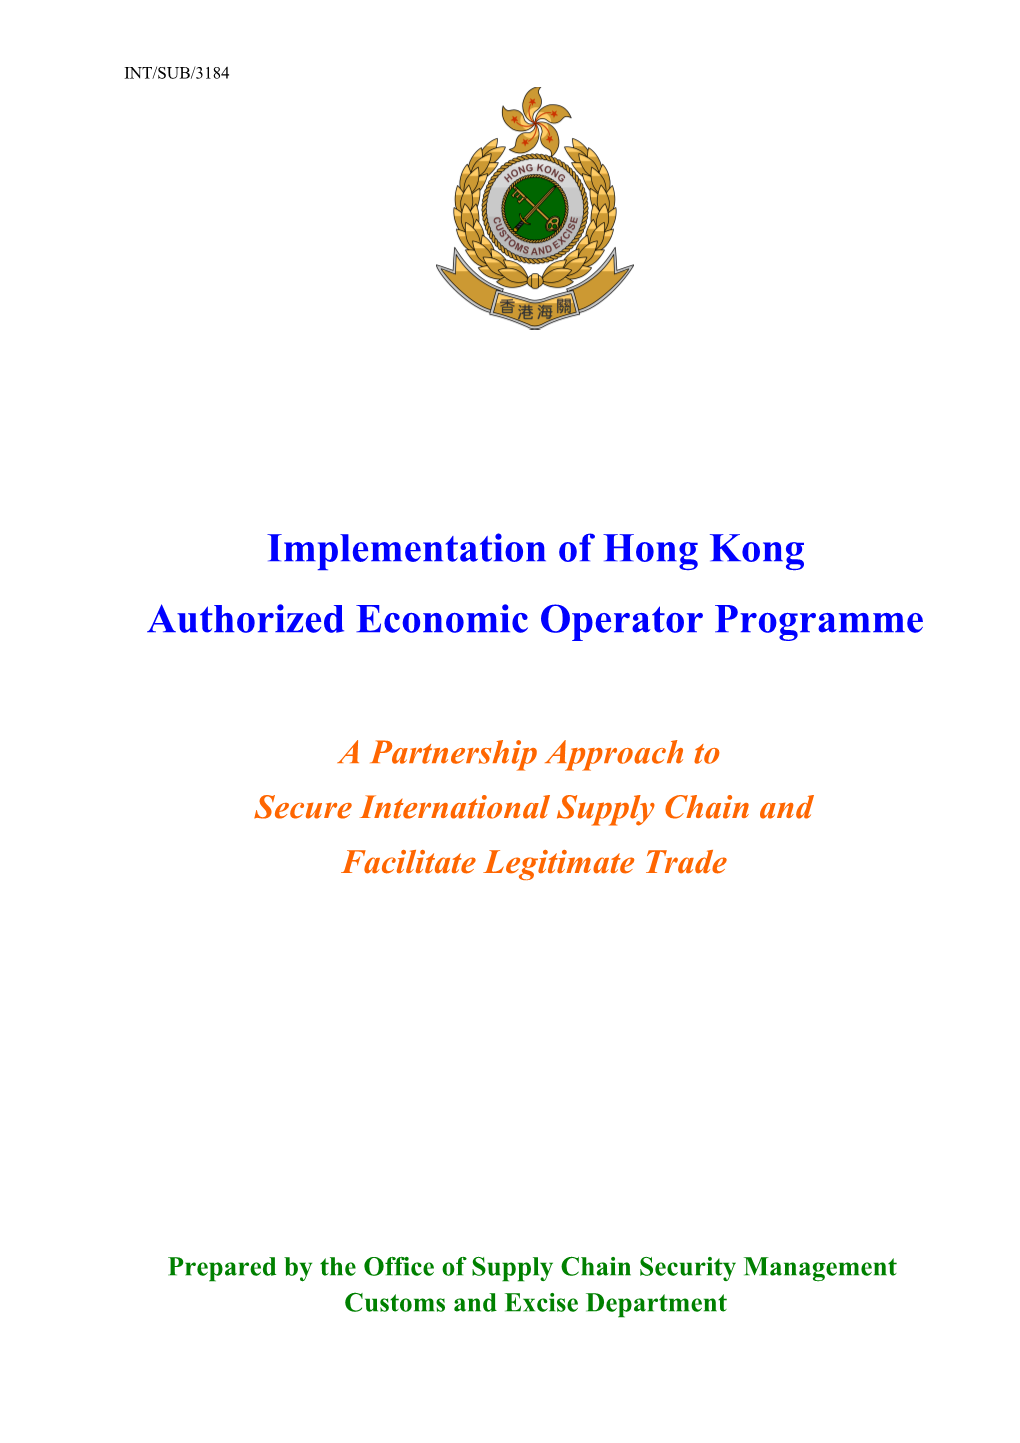 Suggested Outline for Best Practices of Implementation of a Trade Facilitation Measure